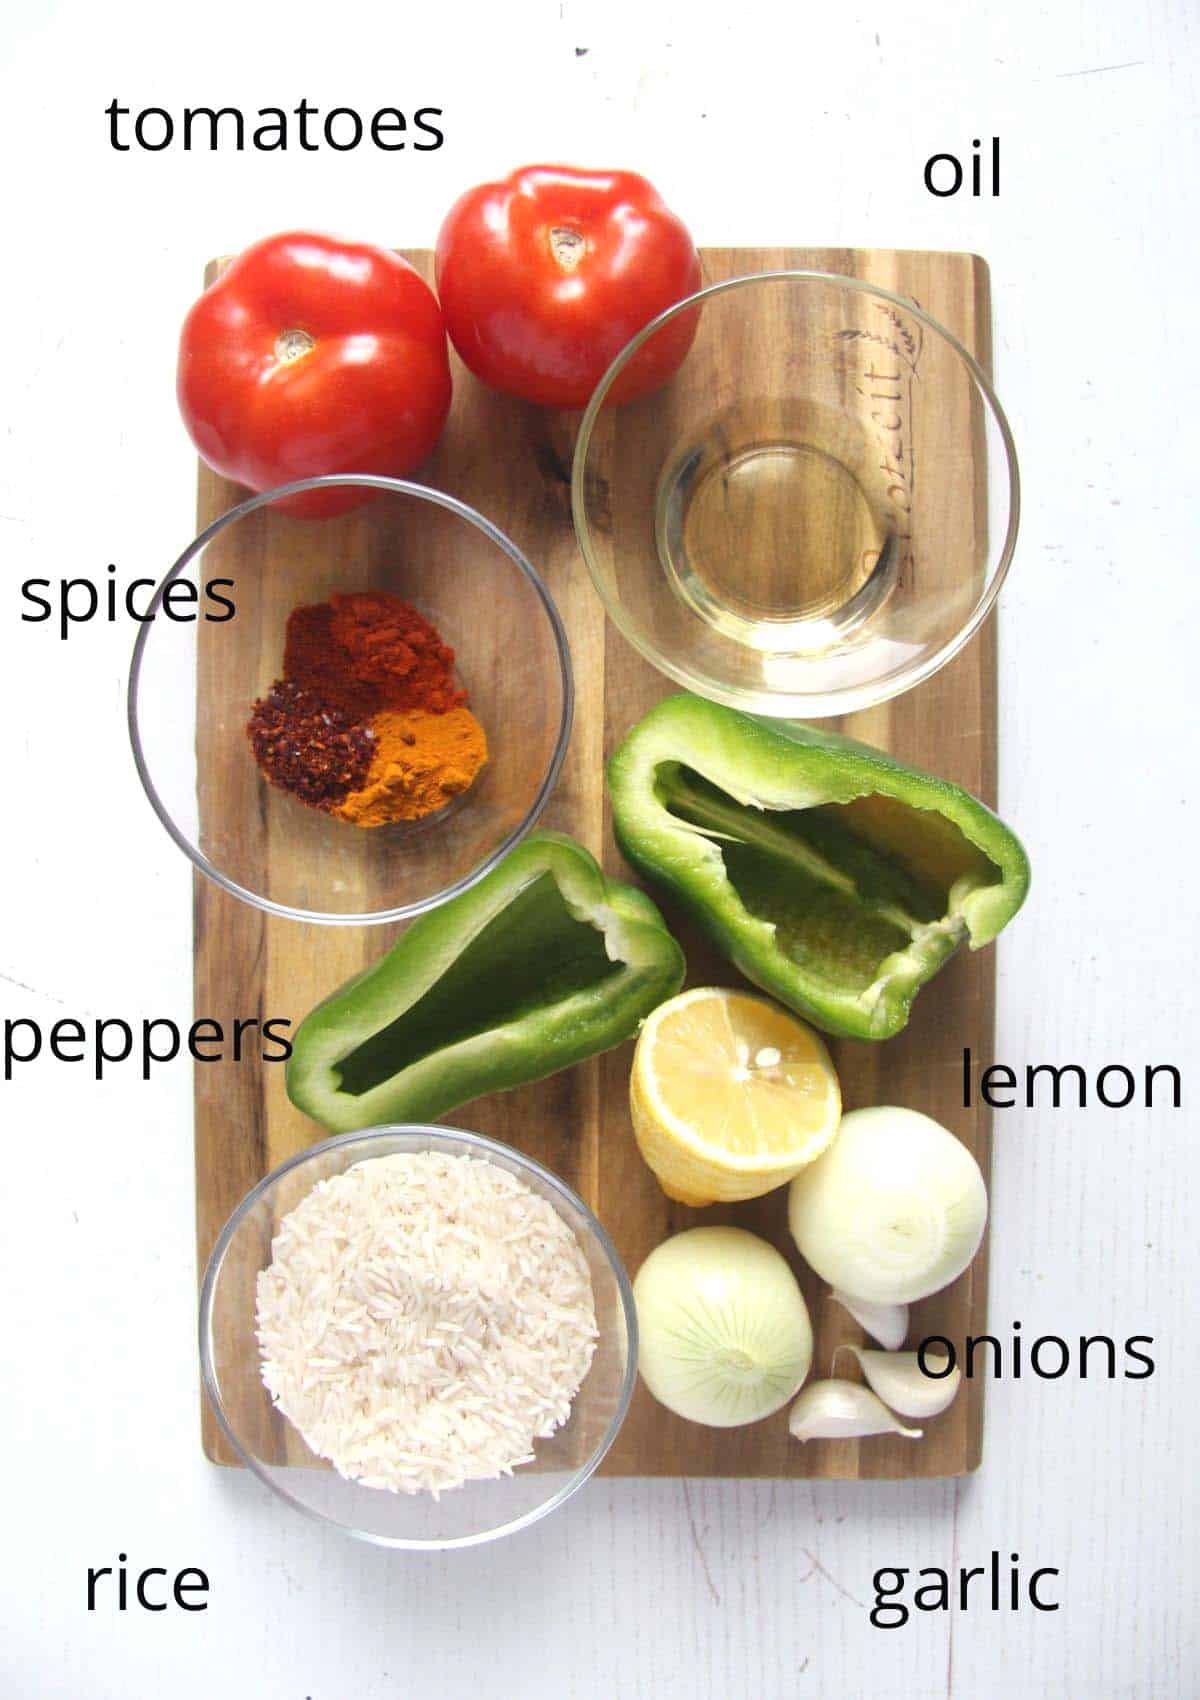 tomatoes, peppers, spices, oil, lemon, rice, garlic, onion on a wooden board.